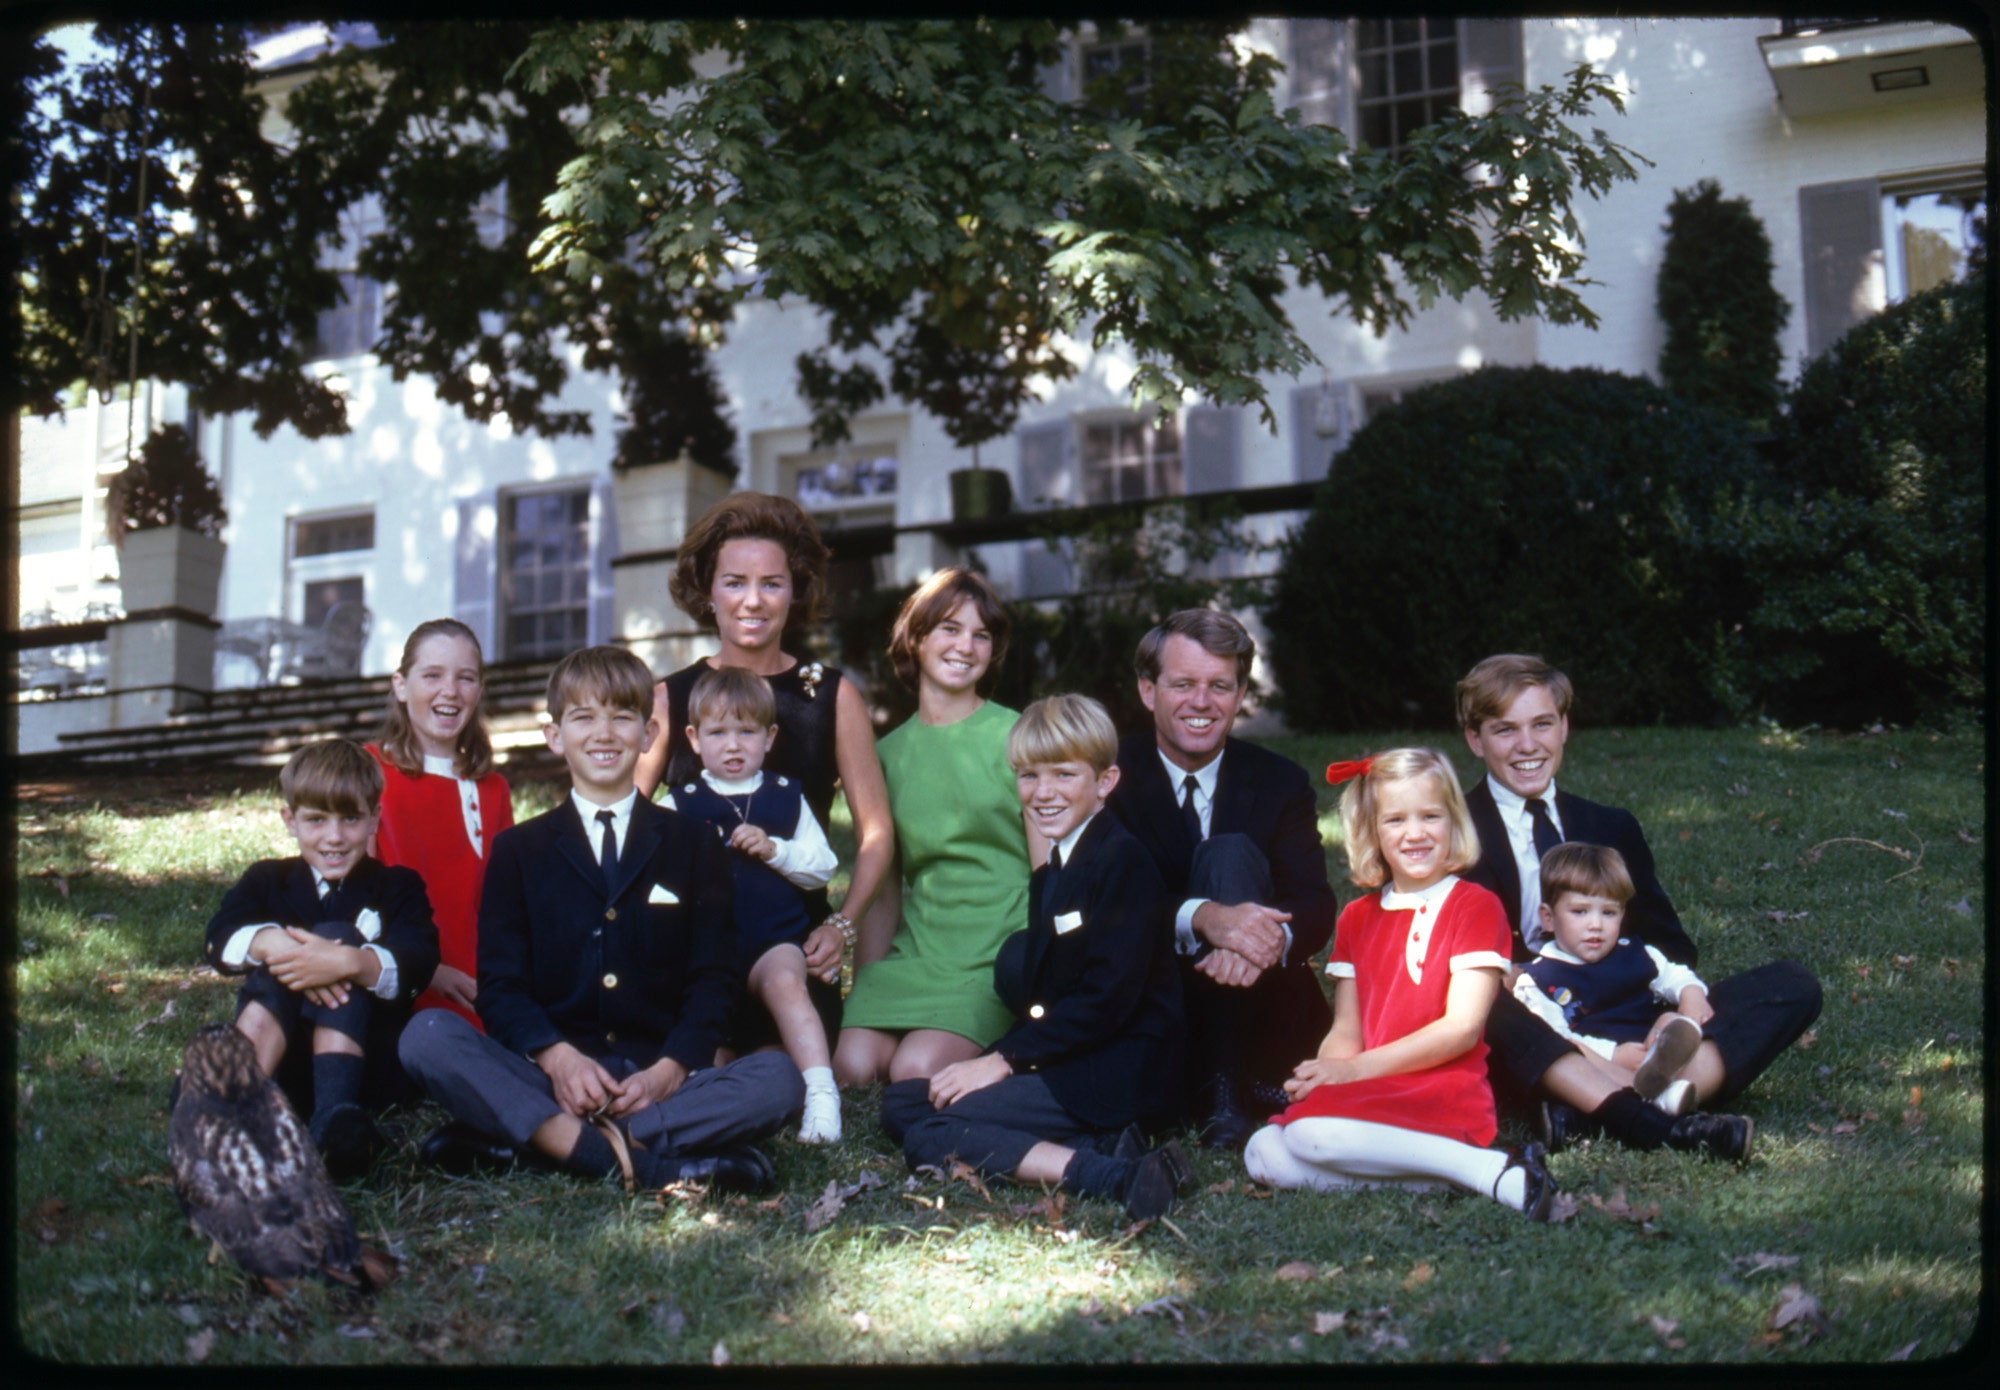 Ethel and Robert F. Kennedy Sr. with nine of their children in 1966.